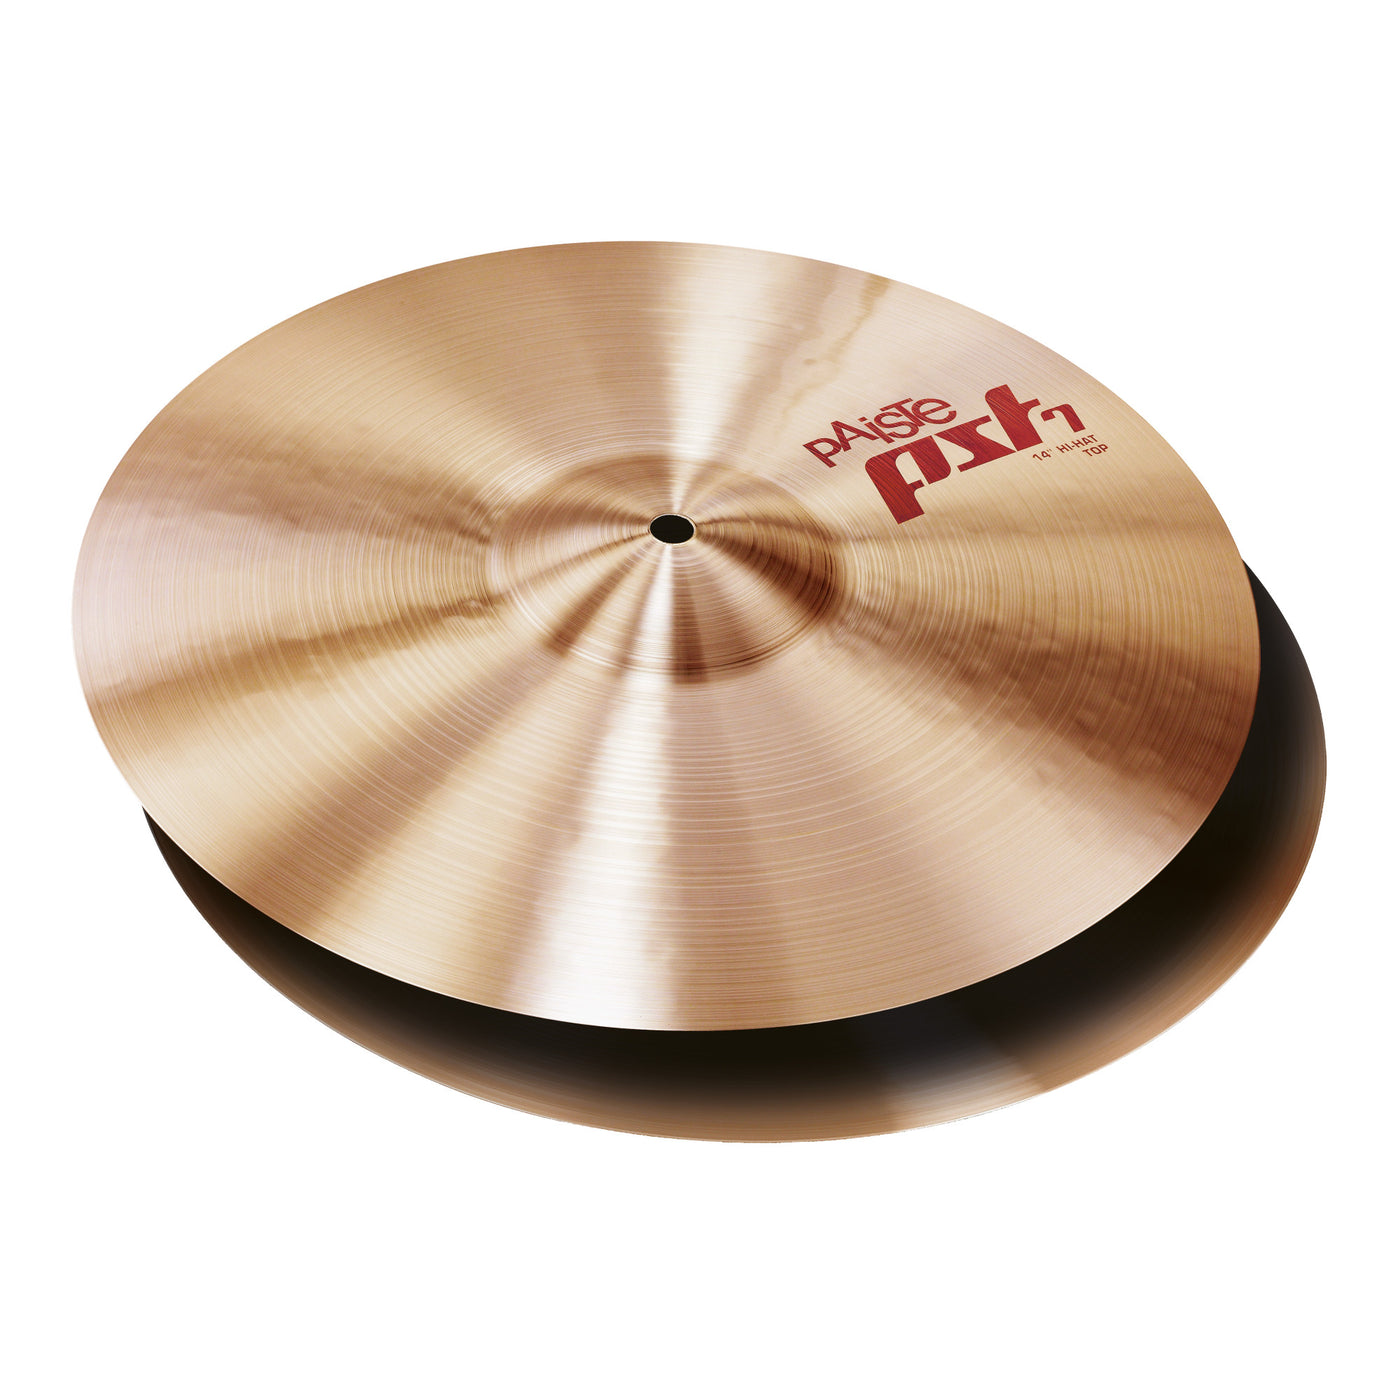 Paiste Heavy Hi-Hat Cymbal, PST 7 Series, Percussion Instrument for Drums, 14"